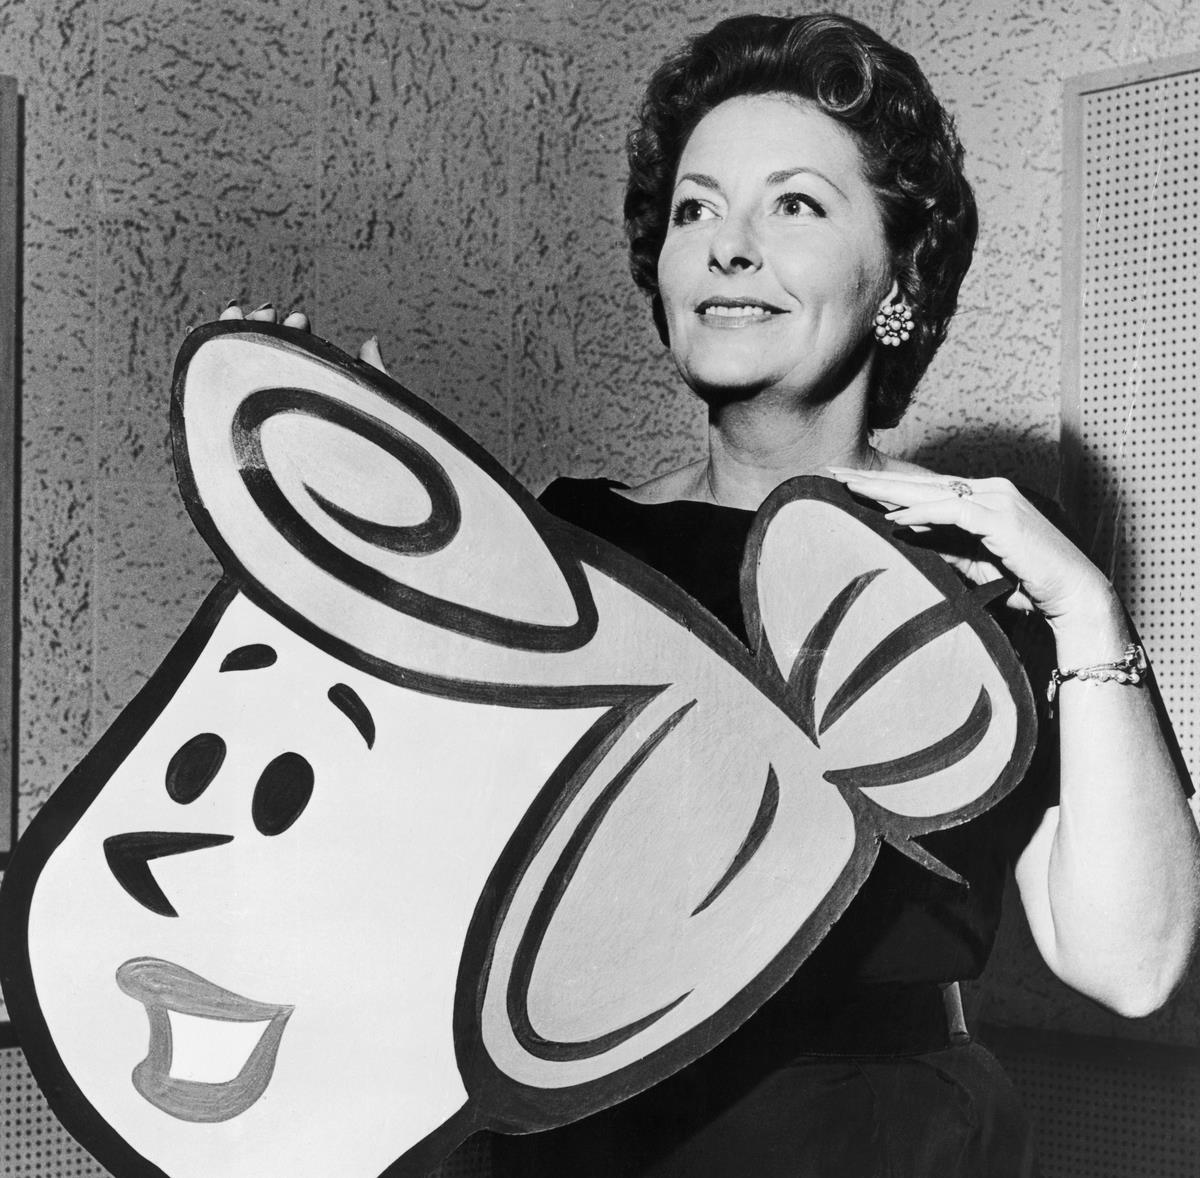 <p>On the radio show, June Whitley portrayed Margaret Anderson. Later on, Jean Vander Pyl overtook the role. Her voice might sound familiar if you watch Hanna-Barbera cartoons; she played Wilma Flinstone in <i>The Flintstones</i> and Rosie the maid in <i>The Jetsons</i>.</p> <p>Unlike Robert Young, Vander Pyl never moved on to the TV show. She remained in voice work until her death in 1999. She has played various roles on <i>Scooby Doo</i> and <i>The Yogi Bear Show</i>. She only worked on <i>Father Knows Best</i> during the radio show's run in 1949.</p>